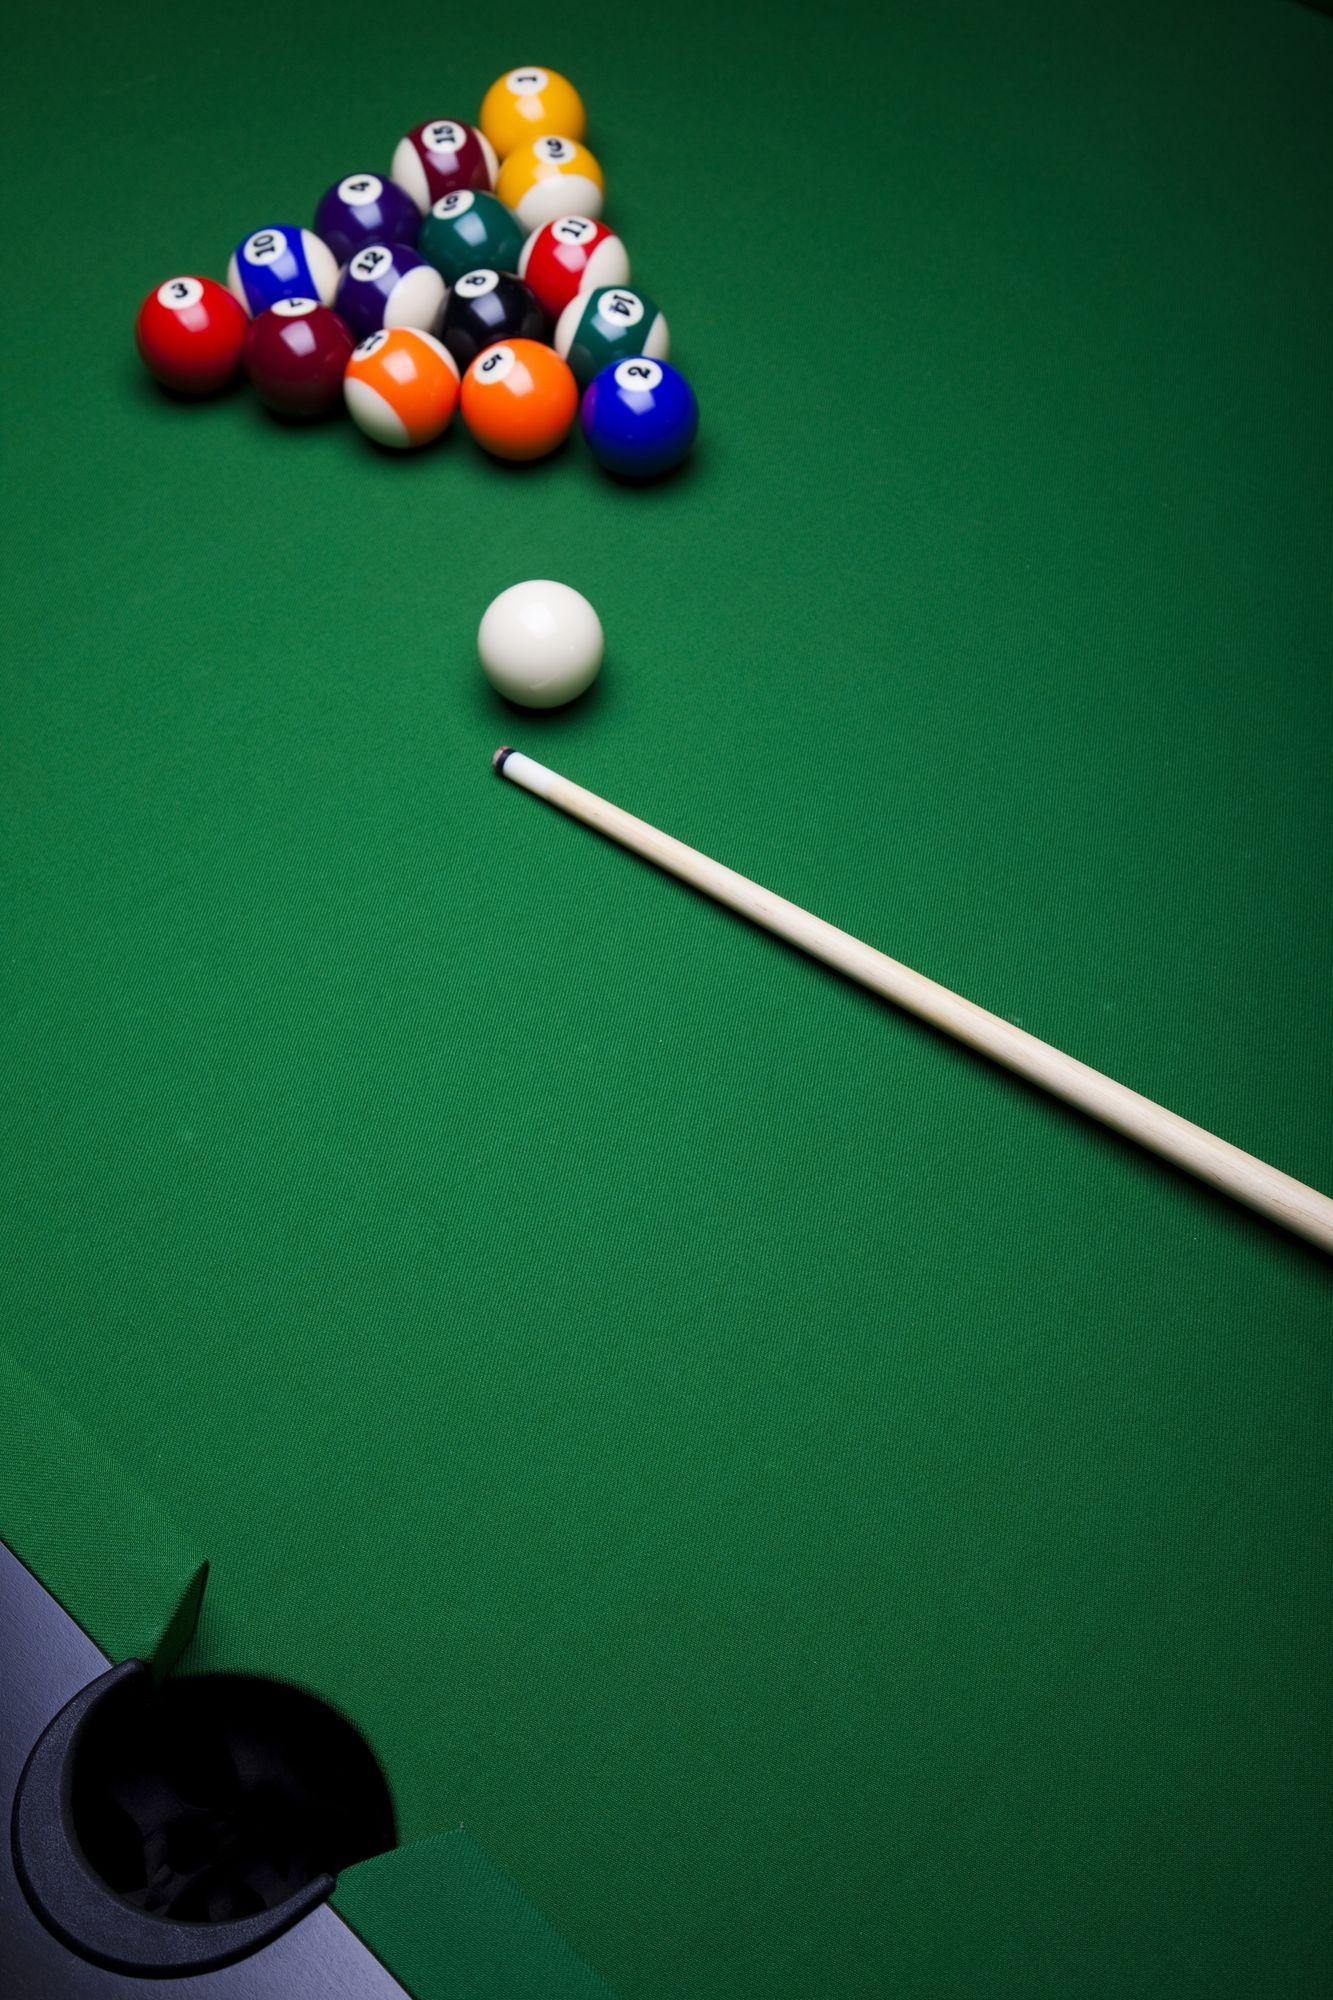 Billiards: A classic eight-ball style of a game with a cue stick, Last preparations before a break shot. 1340x2000 HD Wallpaper.